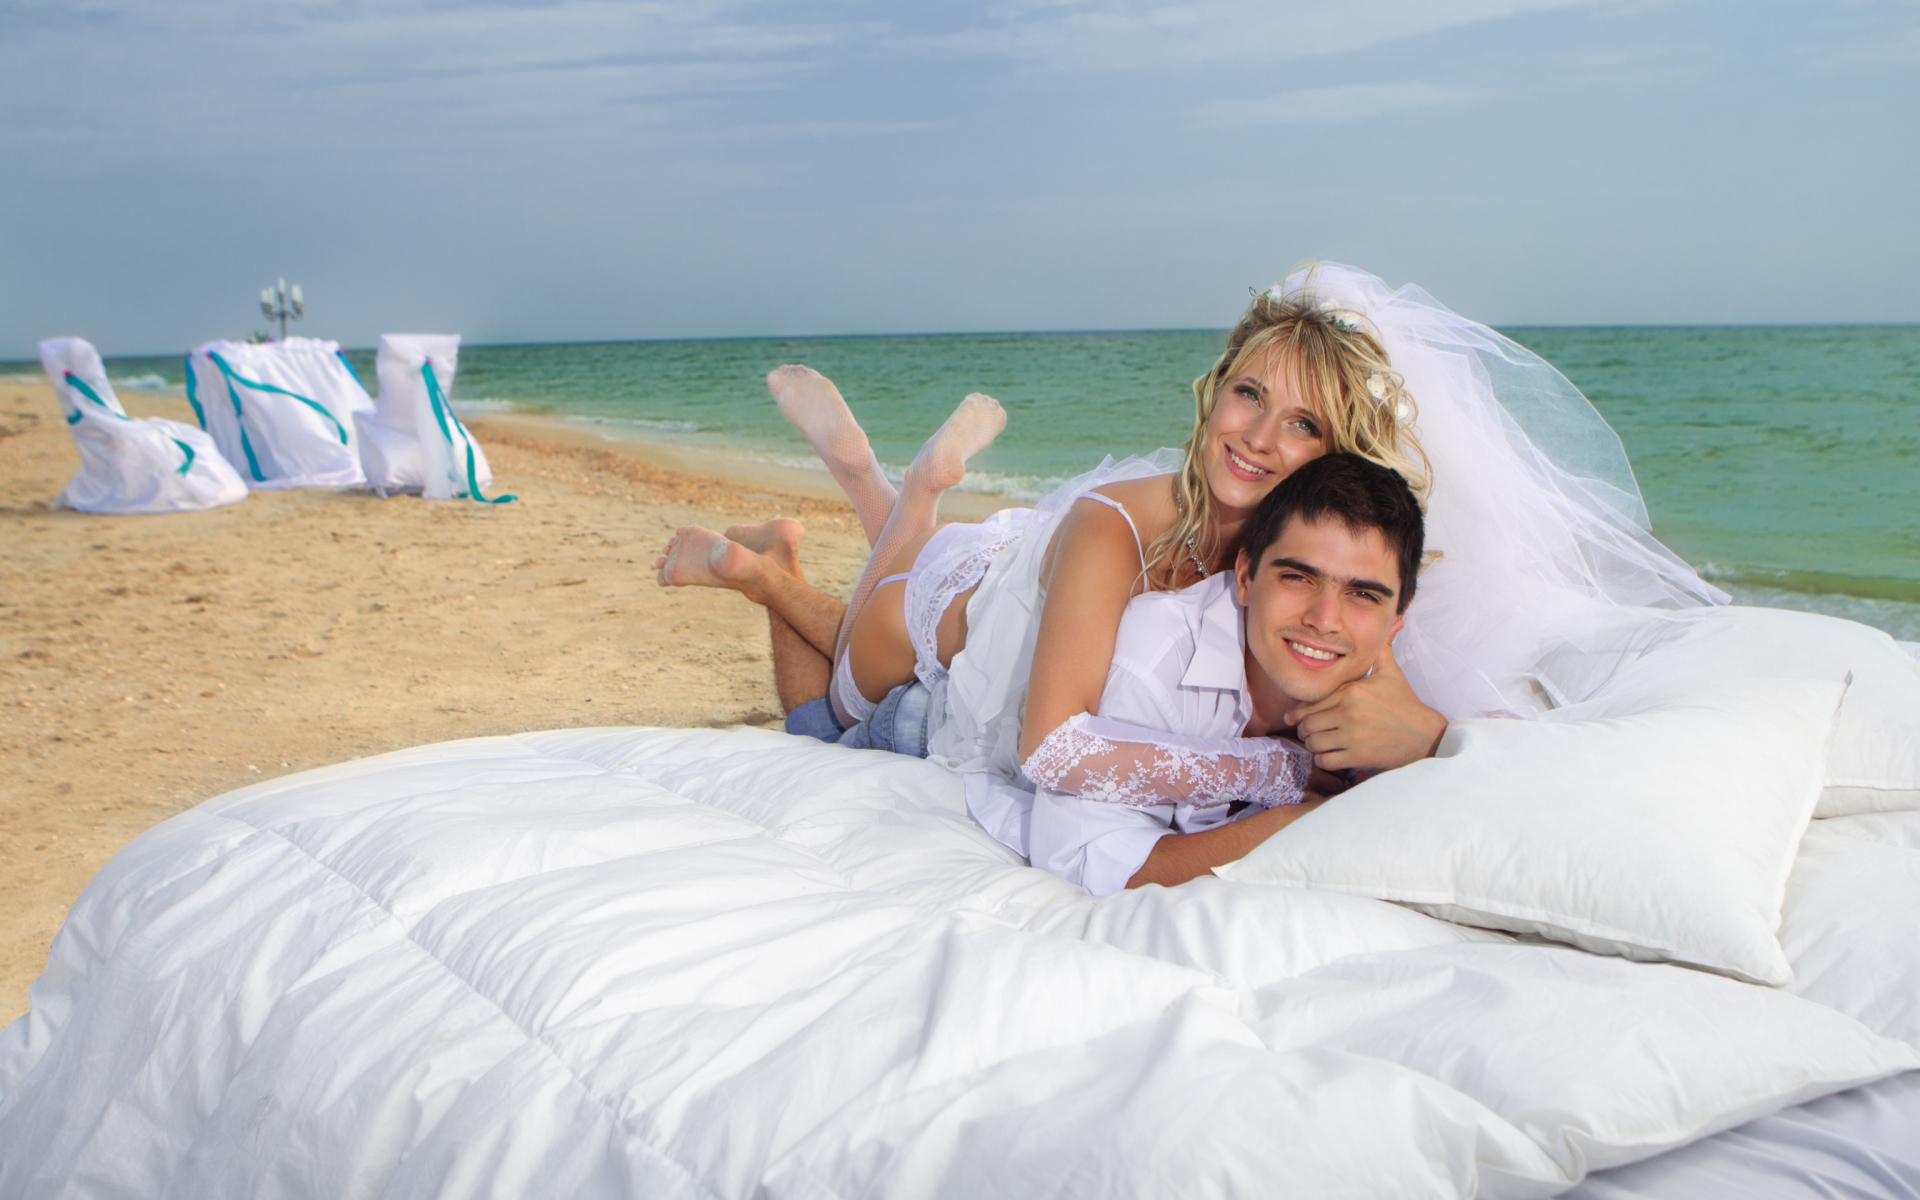 Just Married On Beach wallpaper 1920x1200